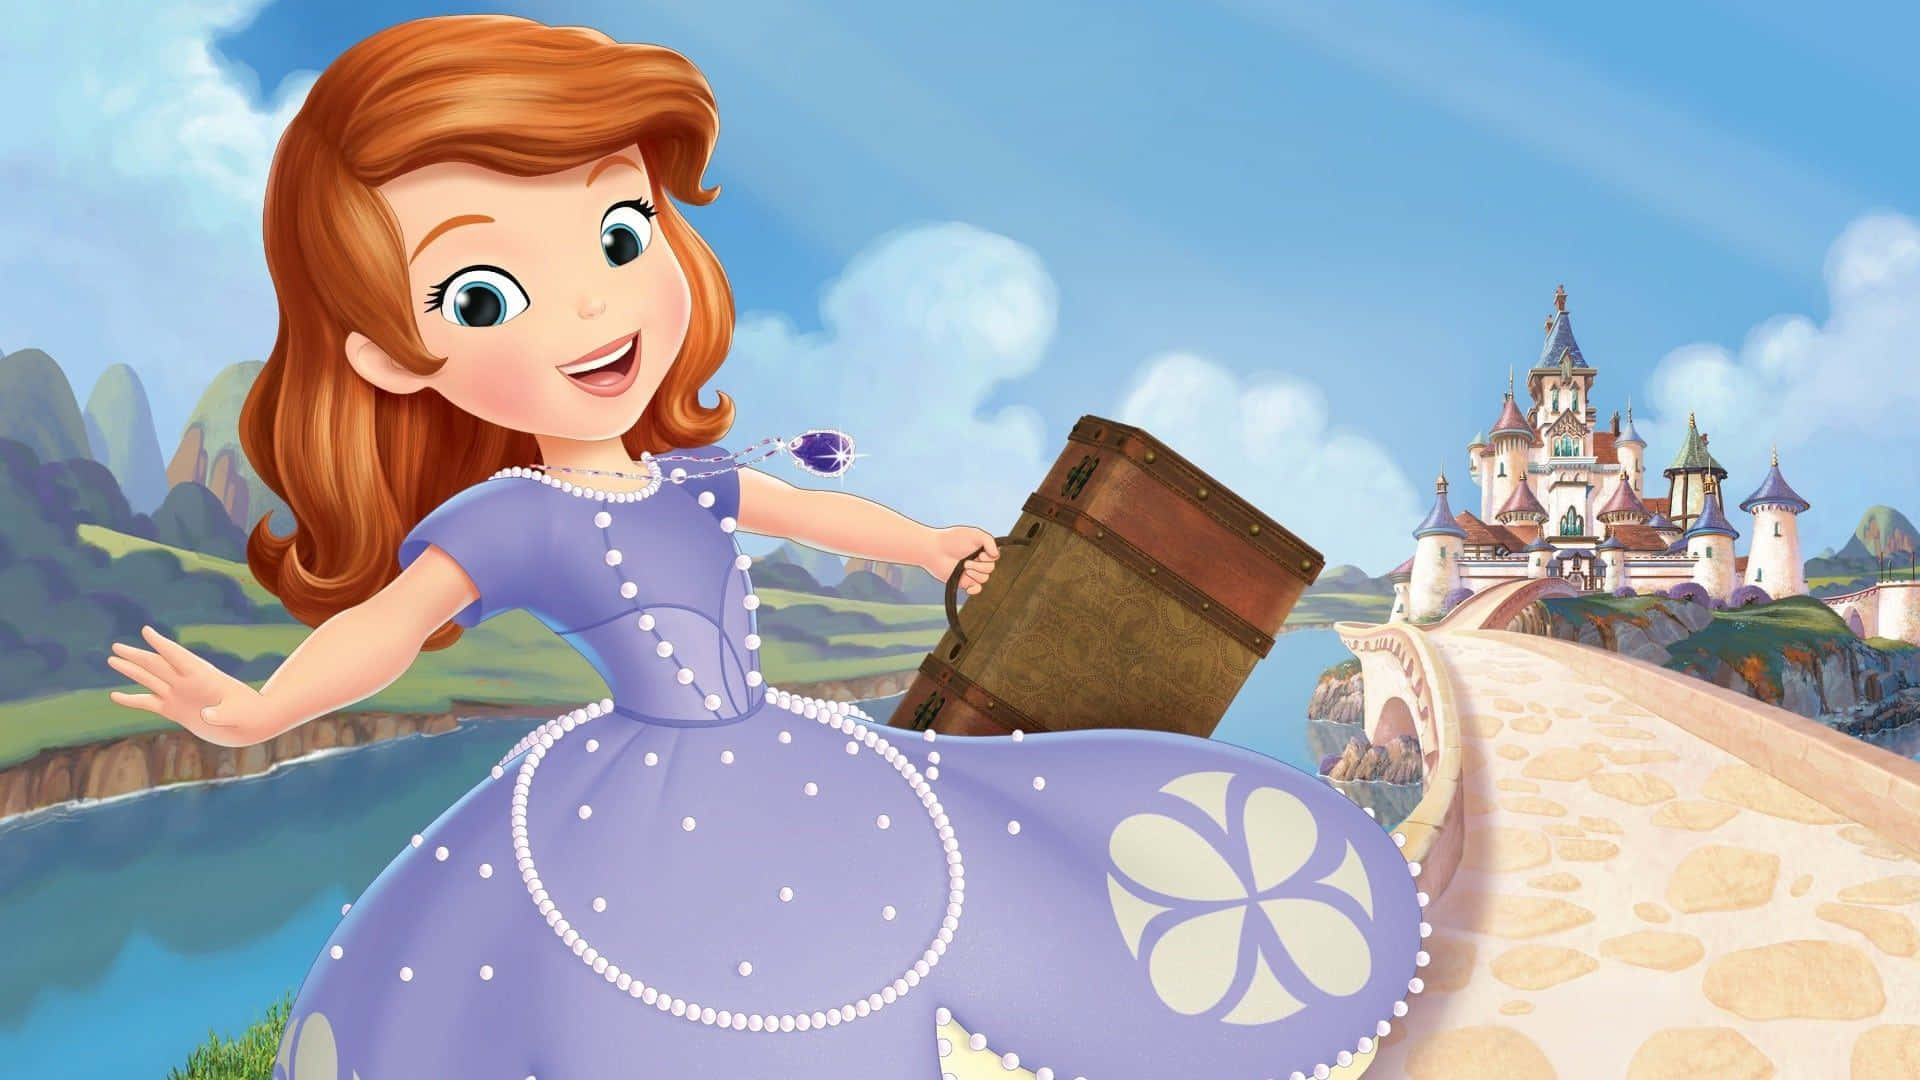 Sofia The First Surrounded by Friends Wallpaper